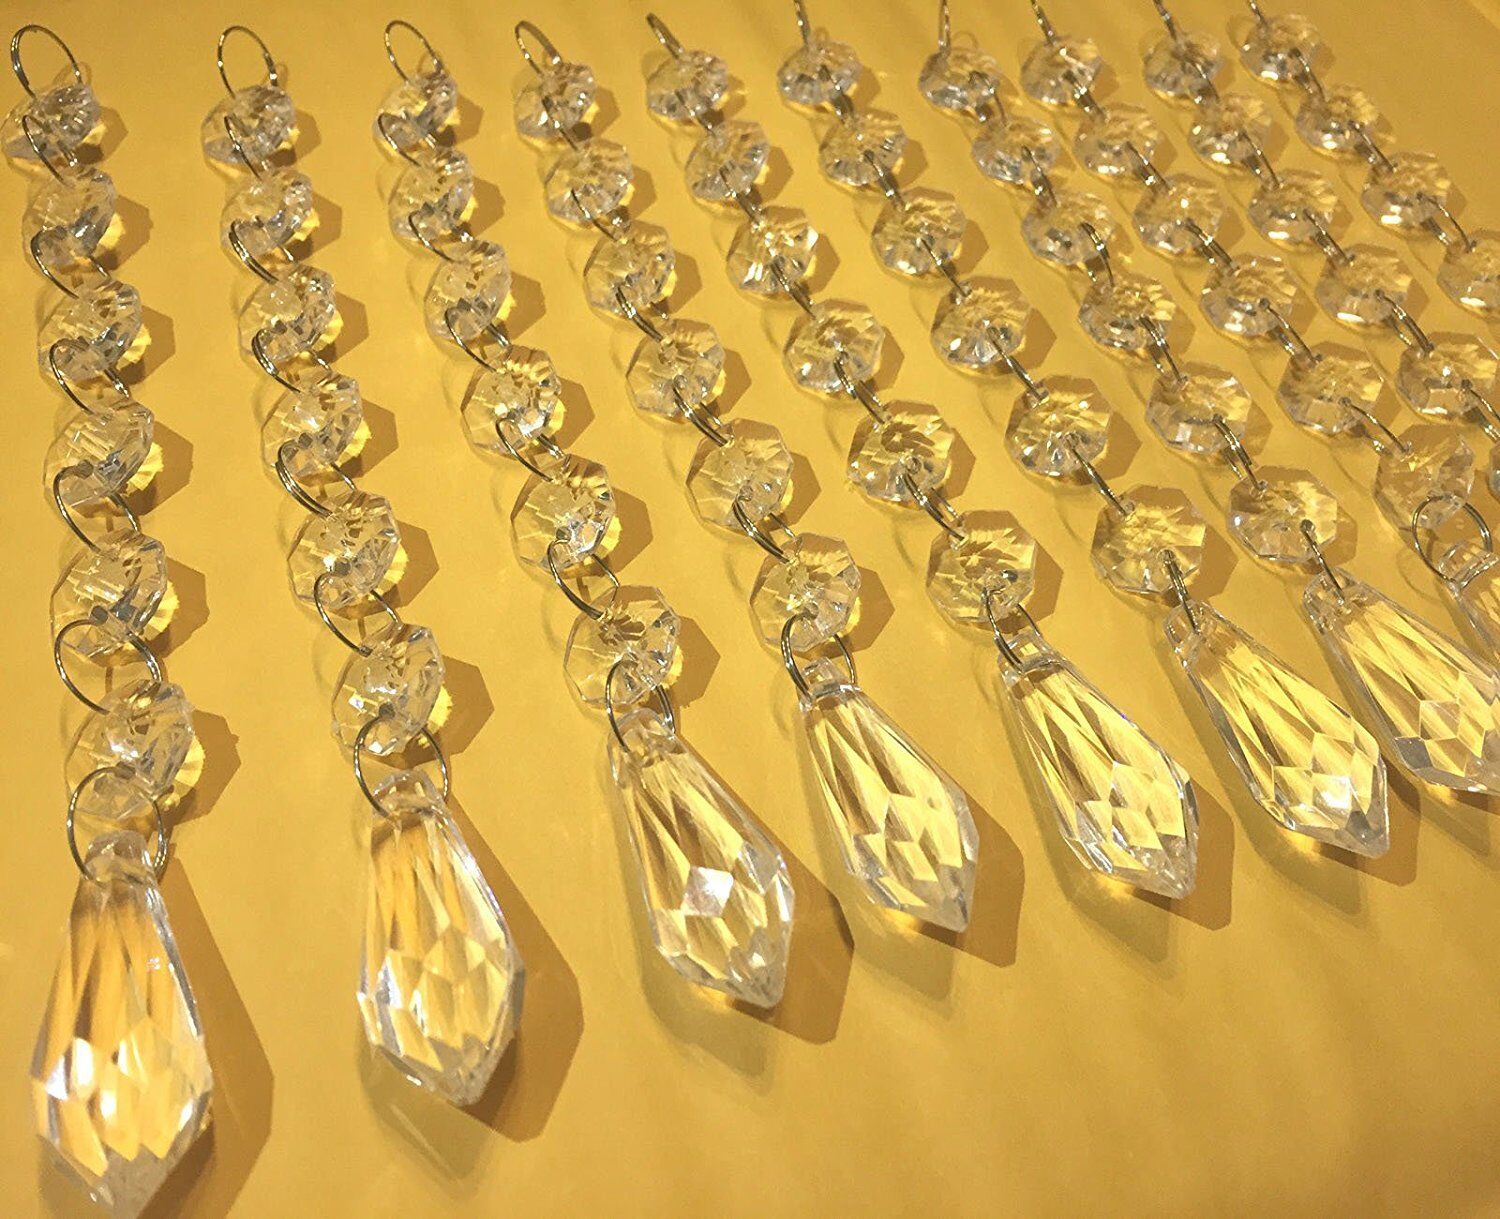 30pc Acrylic Crystals Chandelier Lead Lamp Prisms Parts Hanging Pendent Garland HOHIYA CD14-6-30